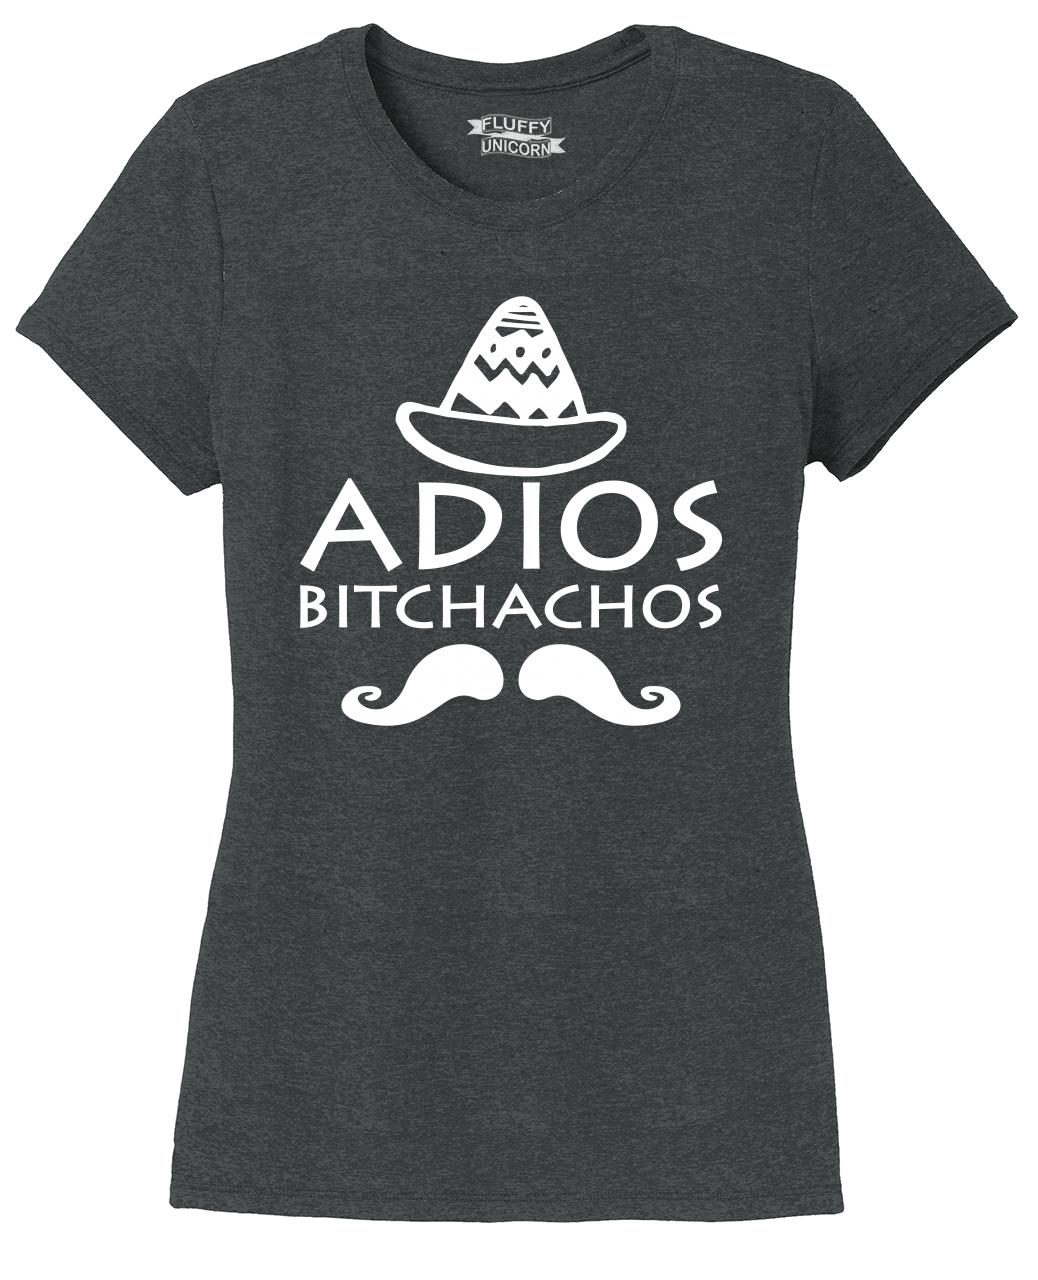 Ladies Tri-Blend Rocker Tank Top Adios Bitchachos Funny Tee Mexico Mexican Military Green Frost XS 